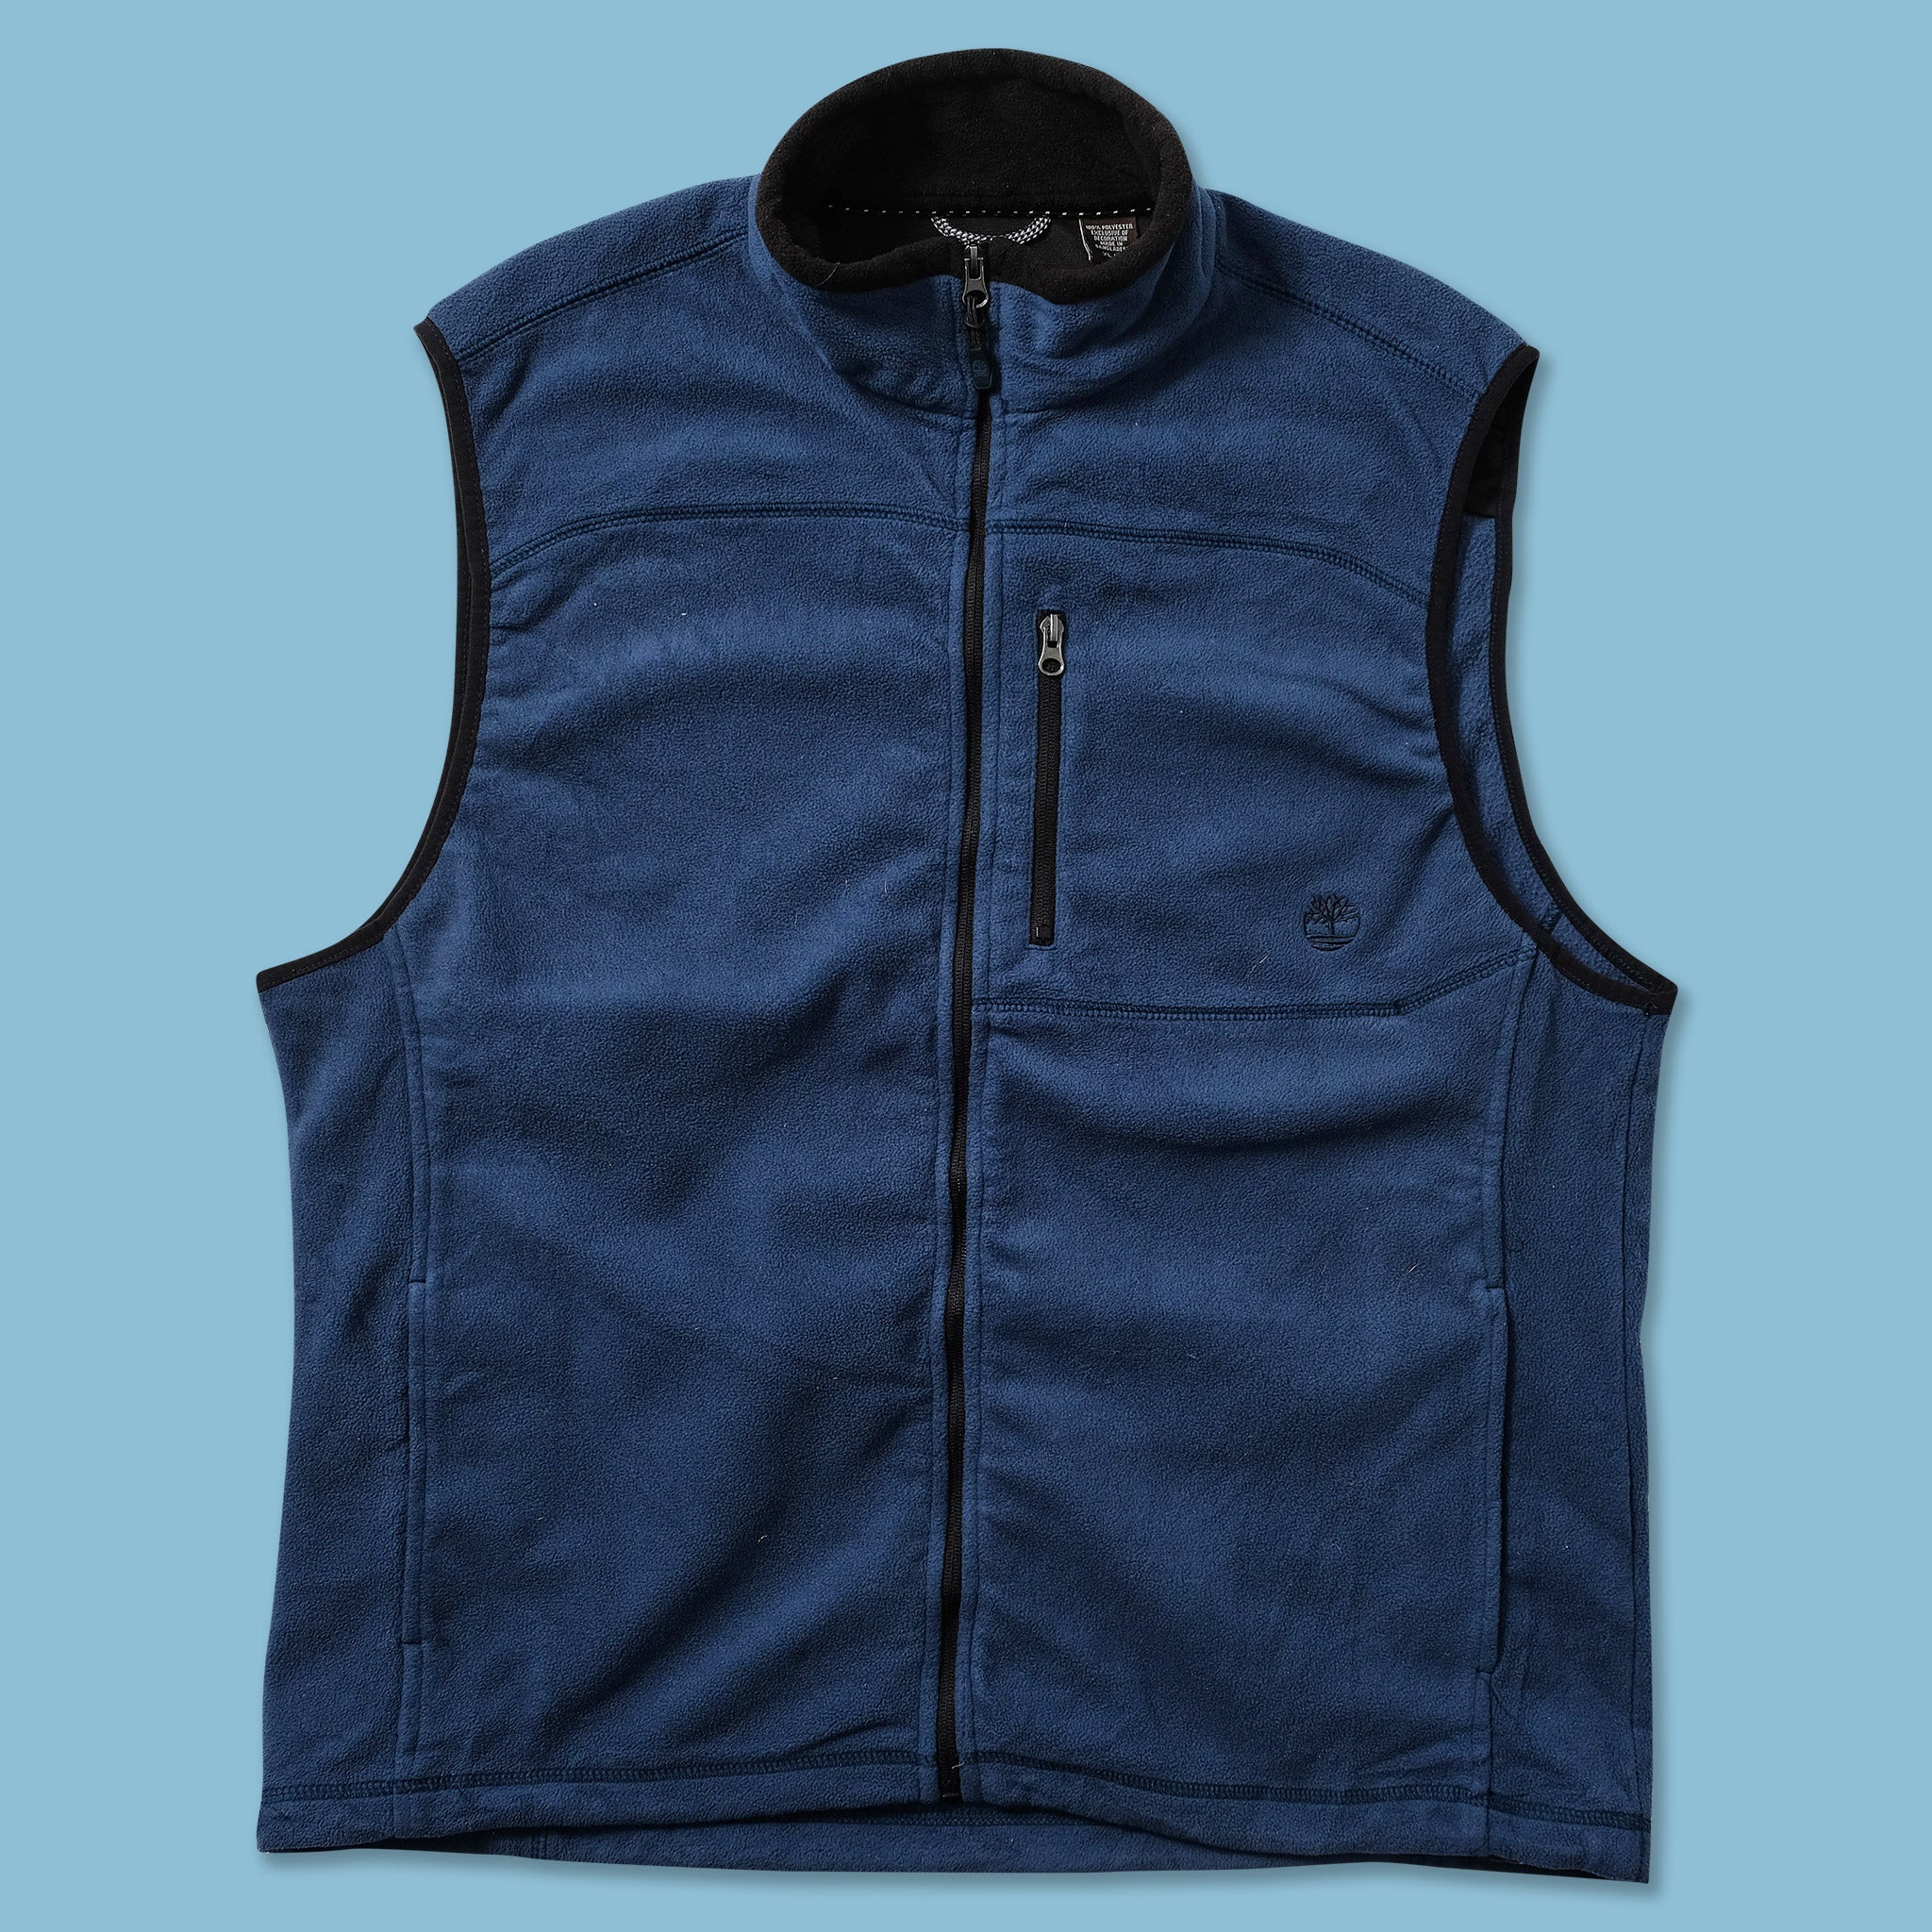 Recycled Sweater Fleece Vest, Fishing Clothing